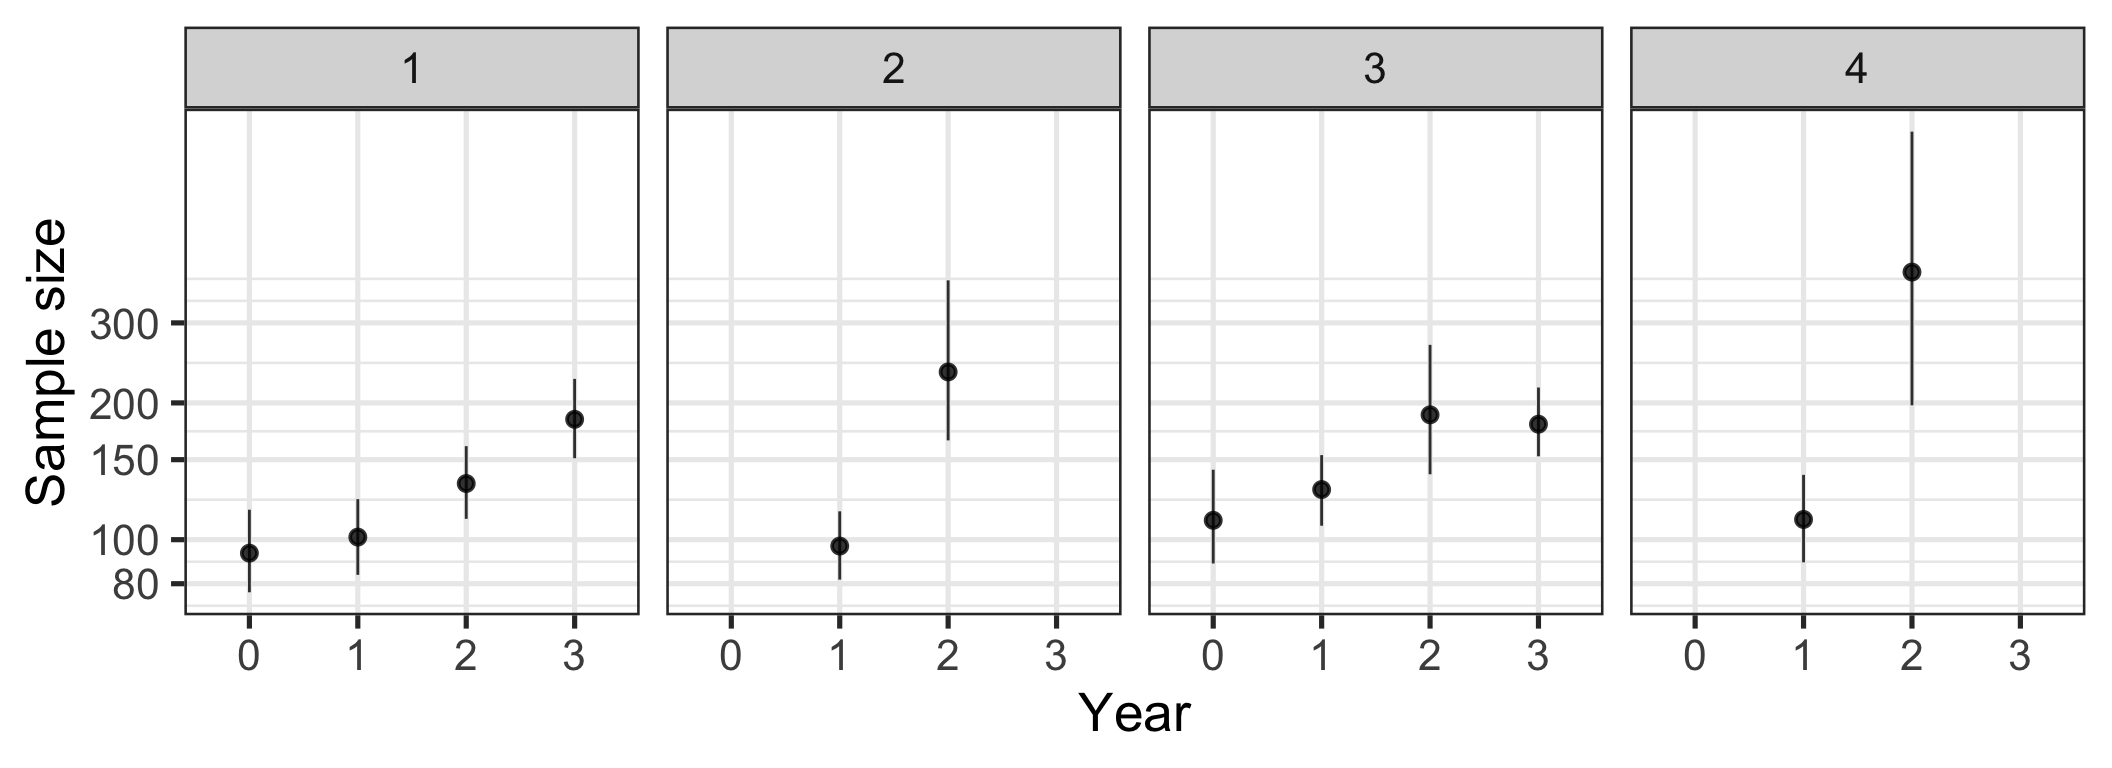 Change in sample size over time by journal. Sample sizes were logarithmised with base 10. Bootstrapped means and 95% CIs.